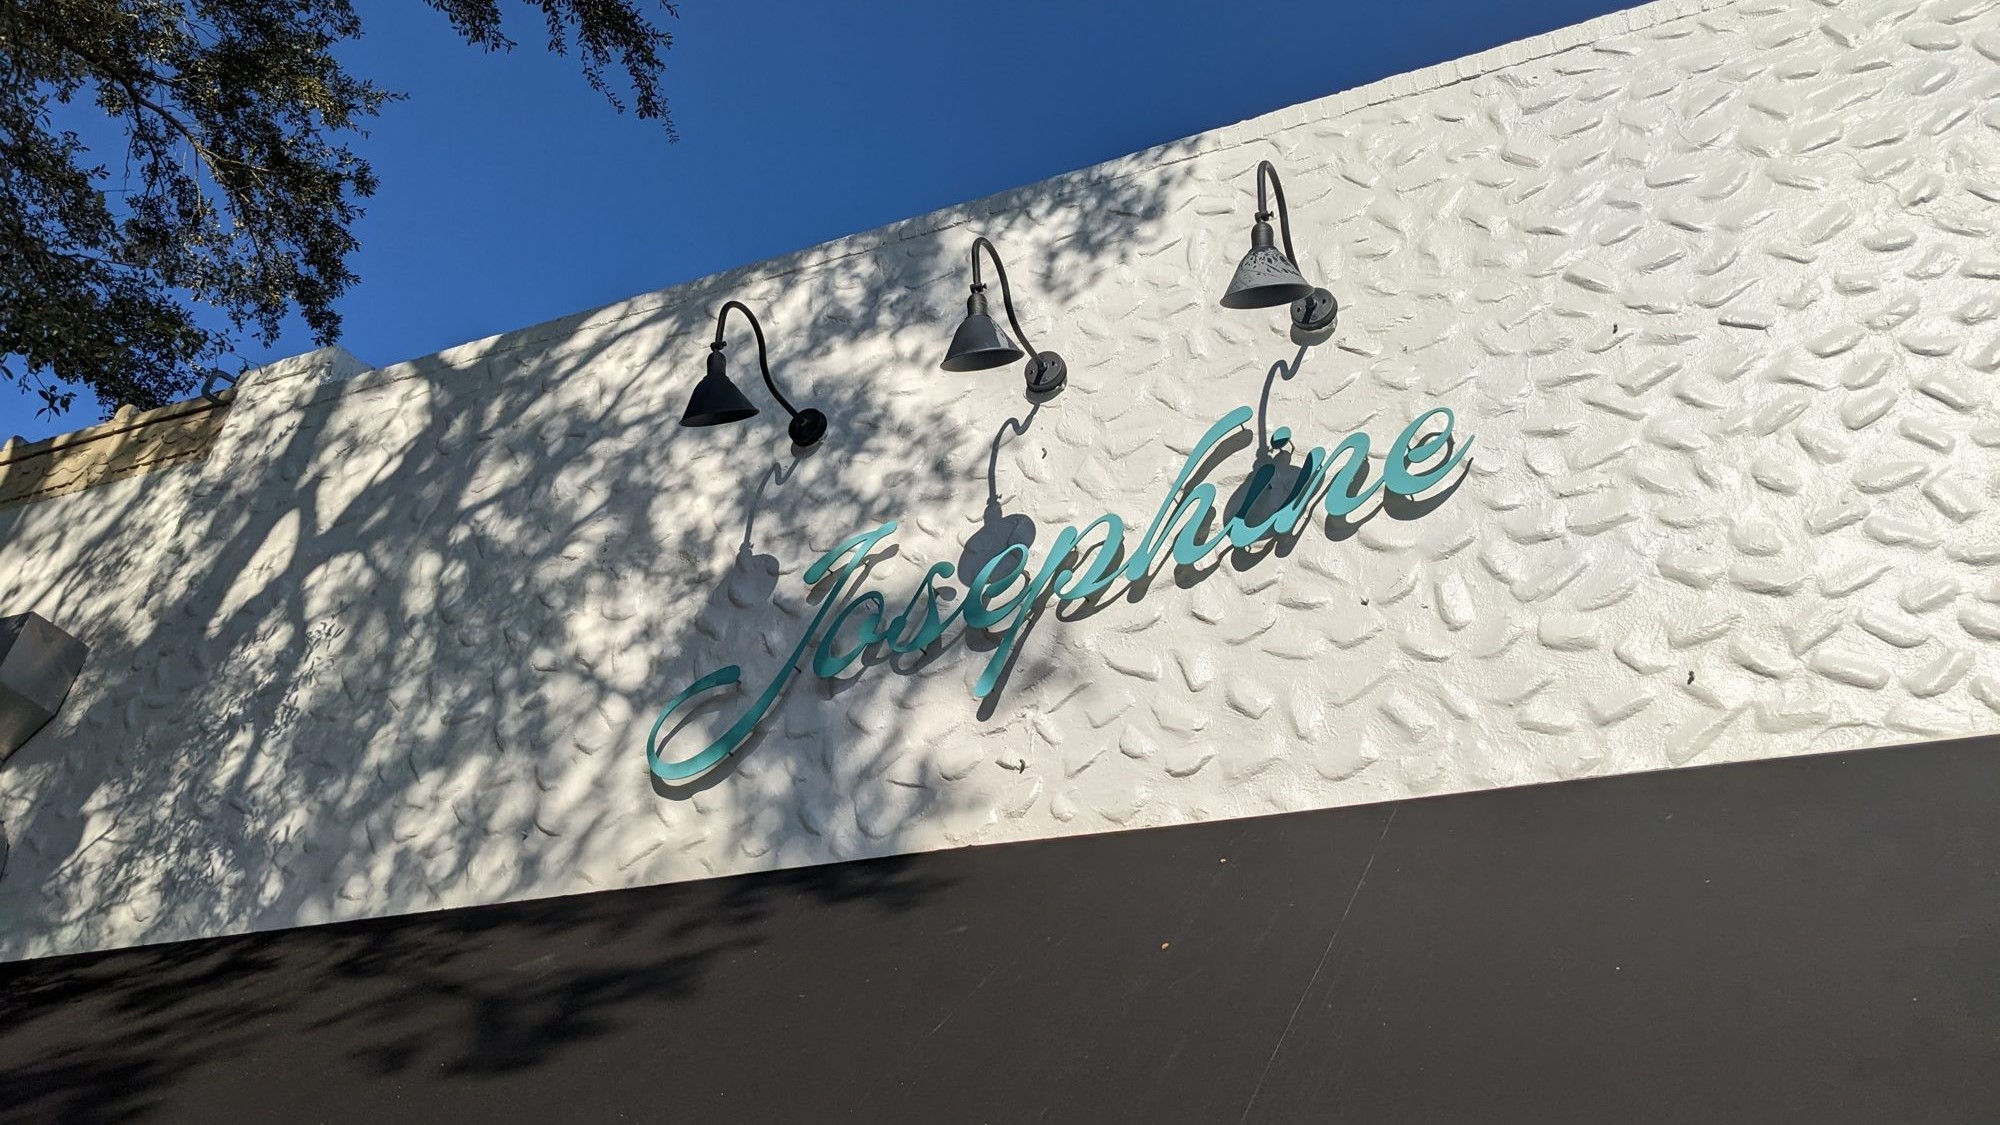 Featured image for “Josphine restaurant opens this week in Avondale”